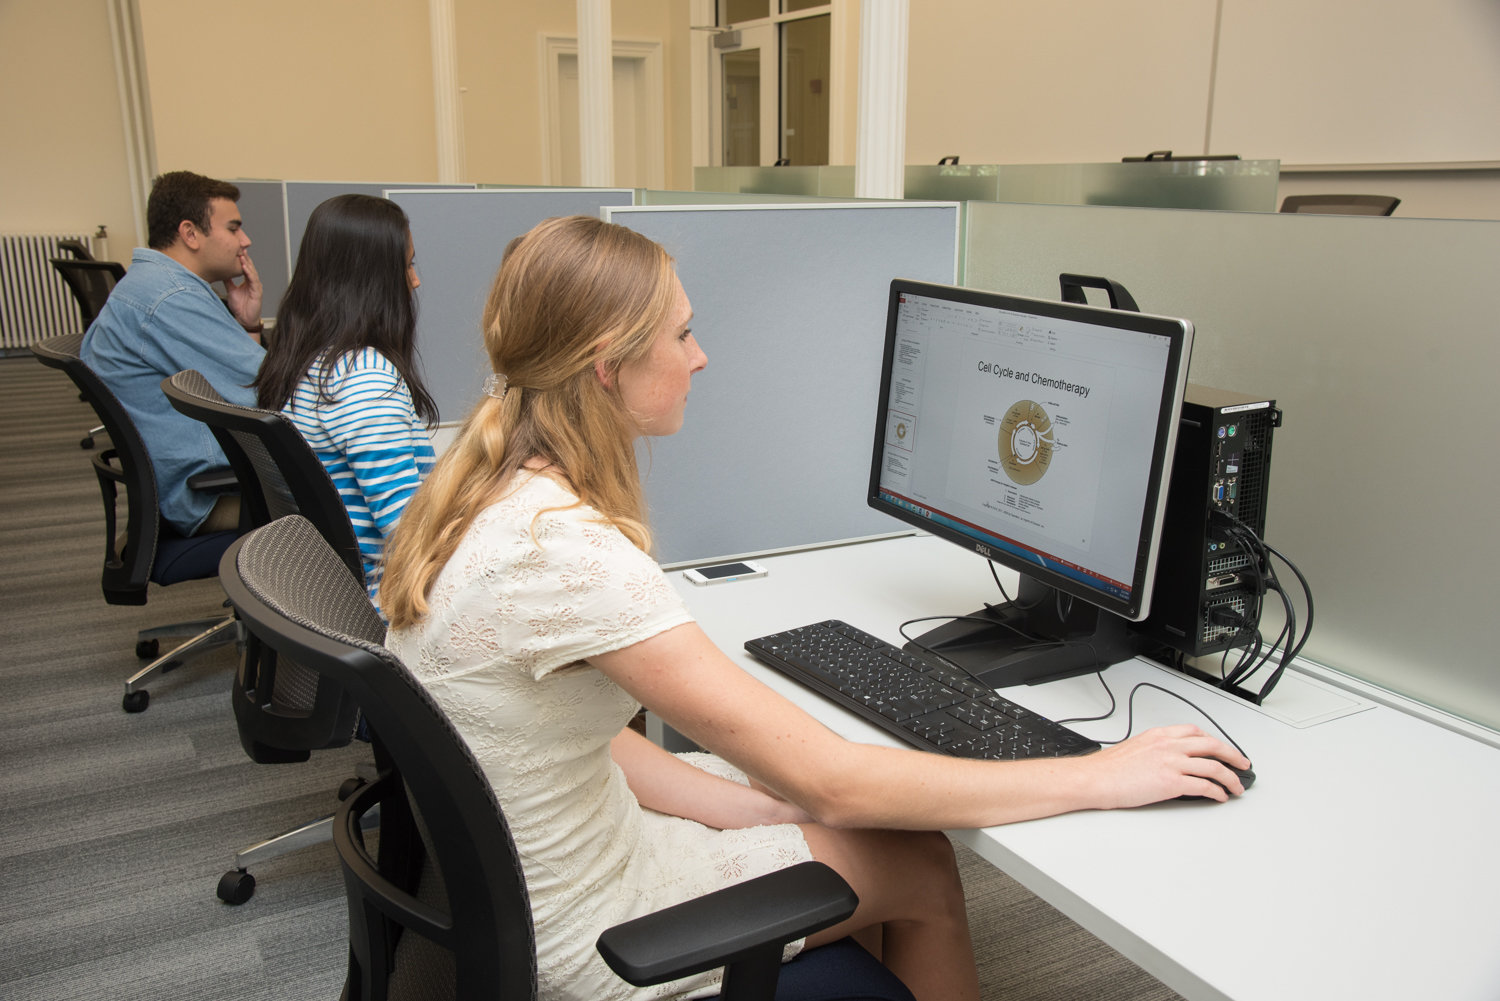 Undergraduate students at the College of Mount Saint Vincent looking to conduct research can find space in the newly opened Fishlinger Center.